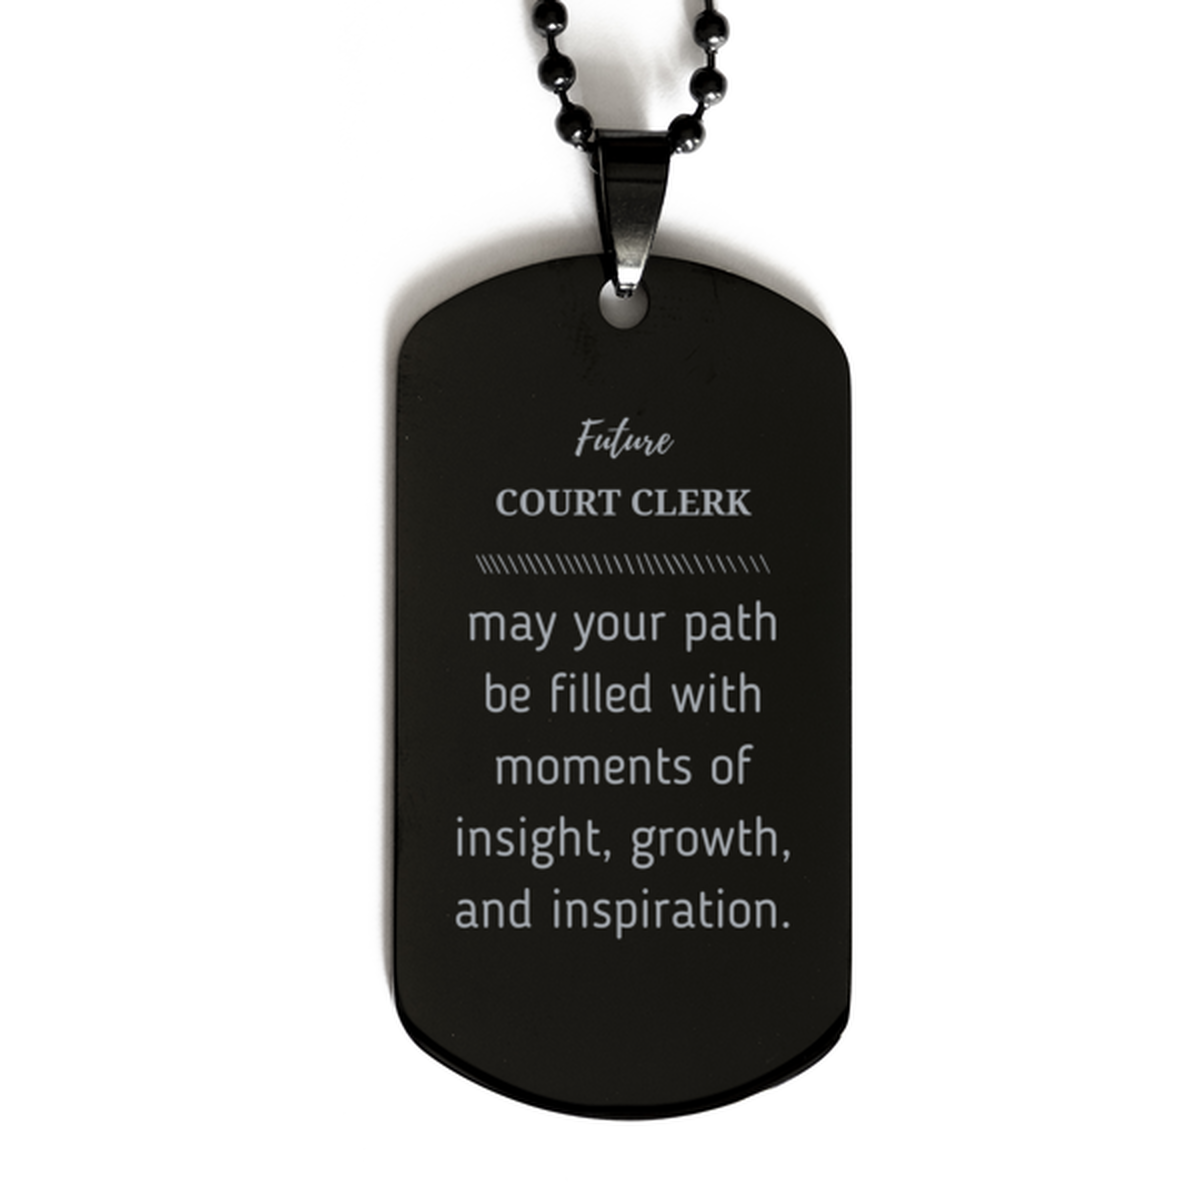 Future Court Clerk Gifts, May your path be filled with moments of insight, Graduation Gifts for New Court Clerk, Christmas Unique Black Dog Tag For Men, Women, Friends